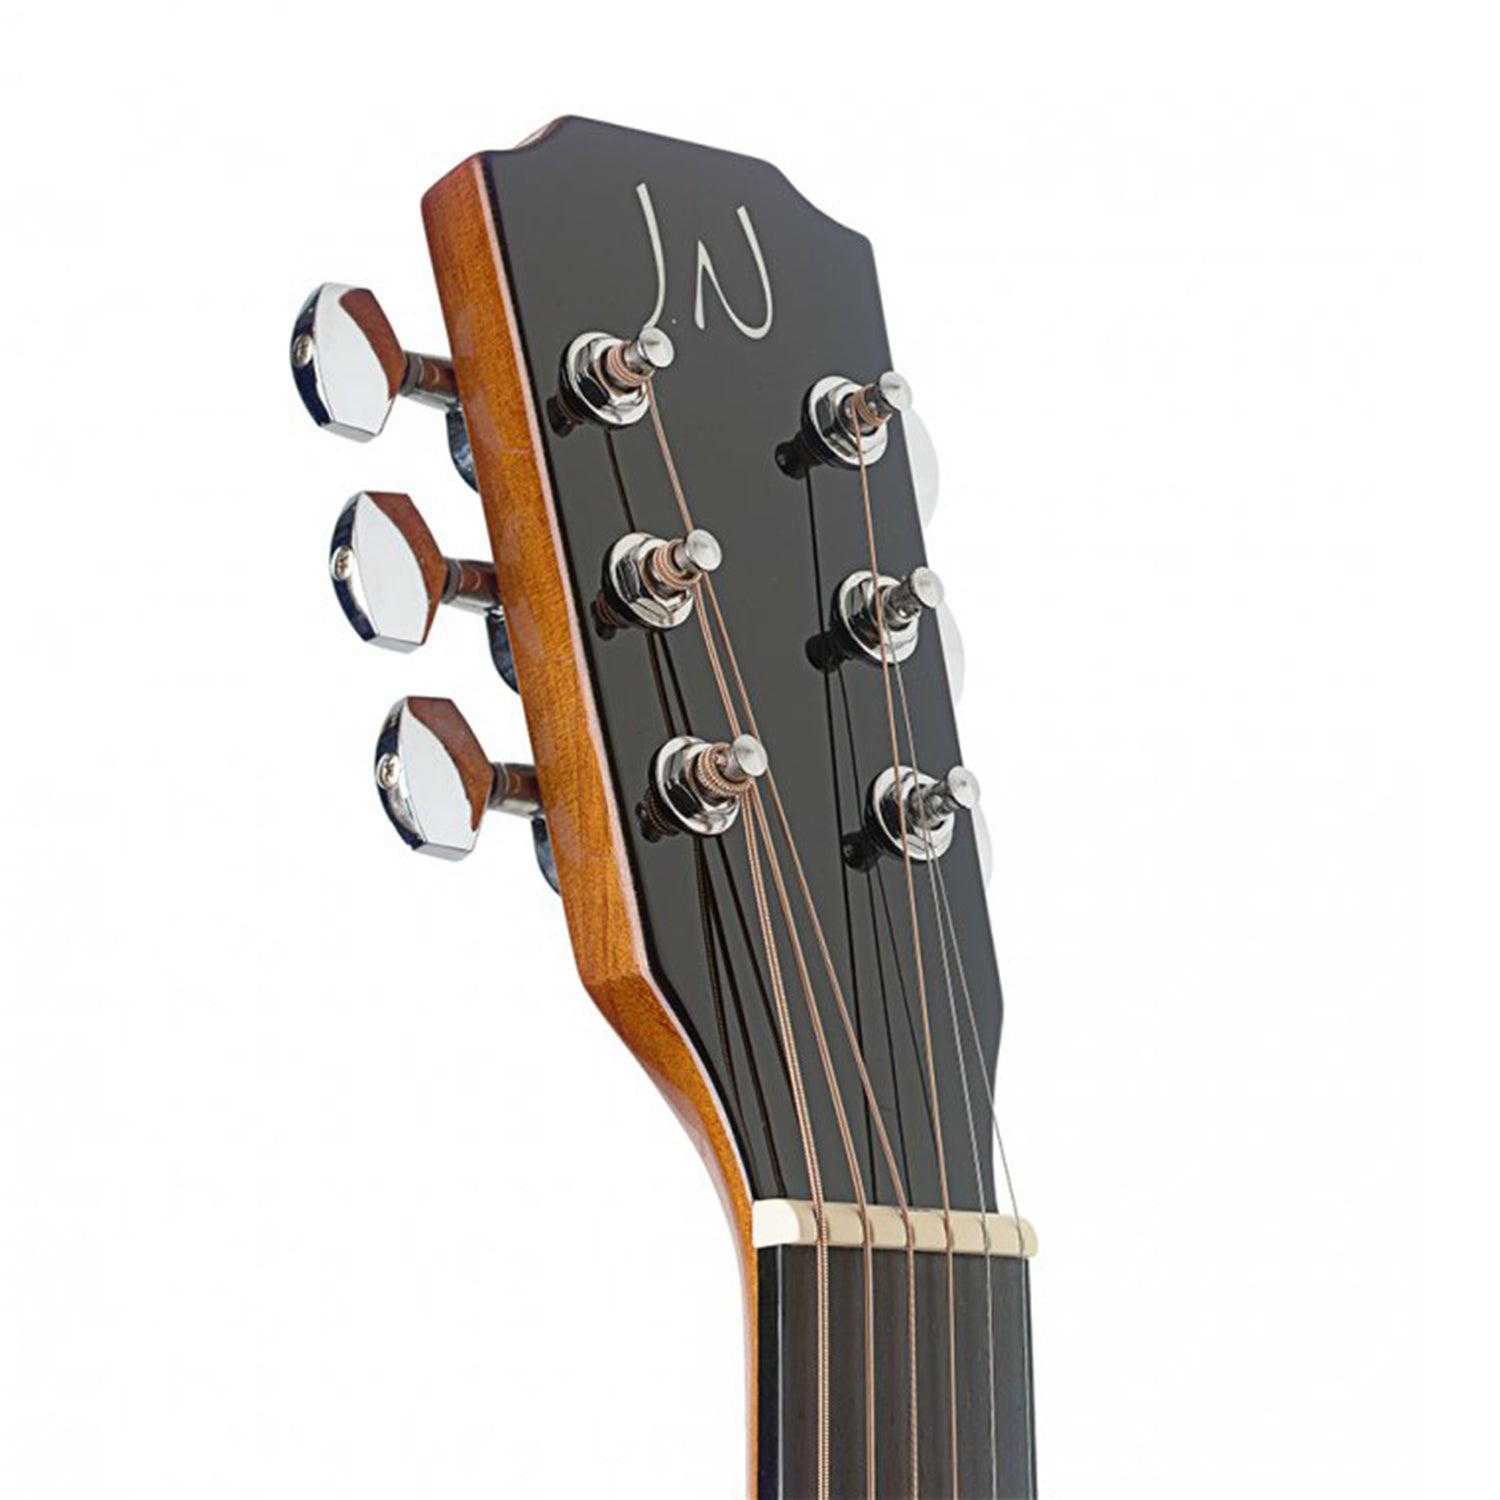 J.N Guitars BES-A N Natural-Coloured Acoustic Auditorium Guitar with Solid Spruce Top, Bessie series